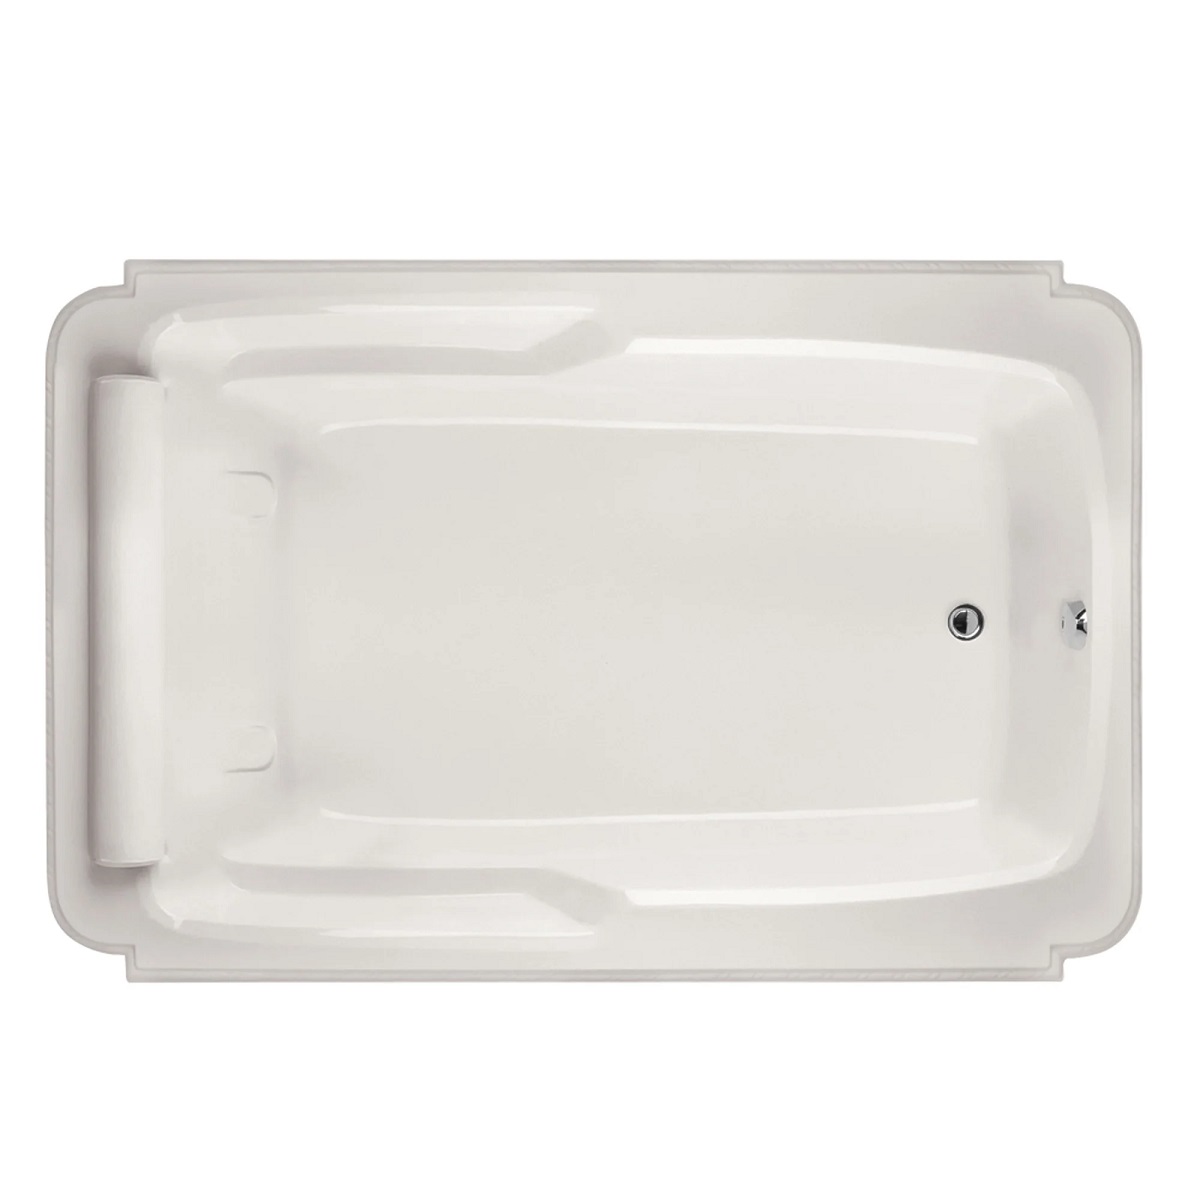 HYDRO SYSTEMS ATL7448ATA DESIGNER COLLECTION ATLANDIA 74 X 48 INCH ACRYLIC DROP-IN BATHTUB WITH THERMAL AIR SYSTEM